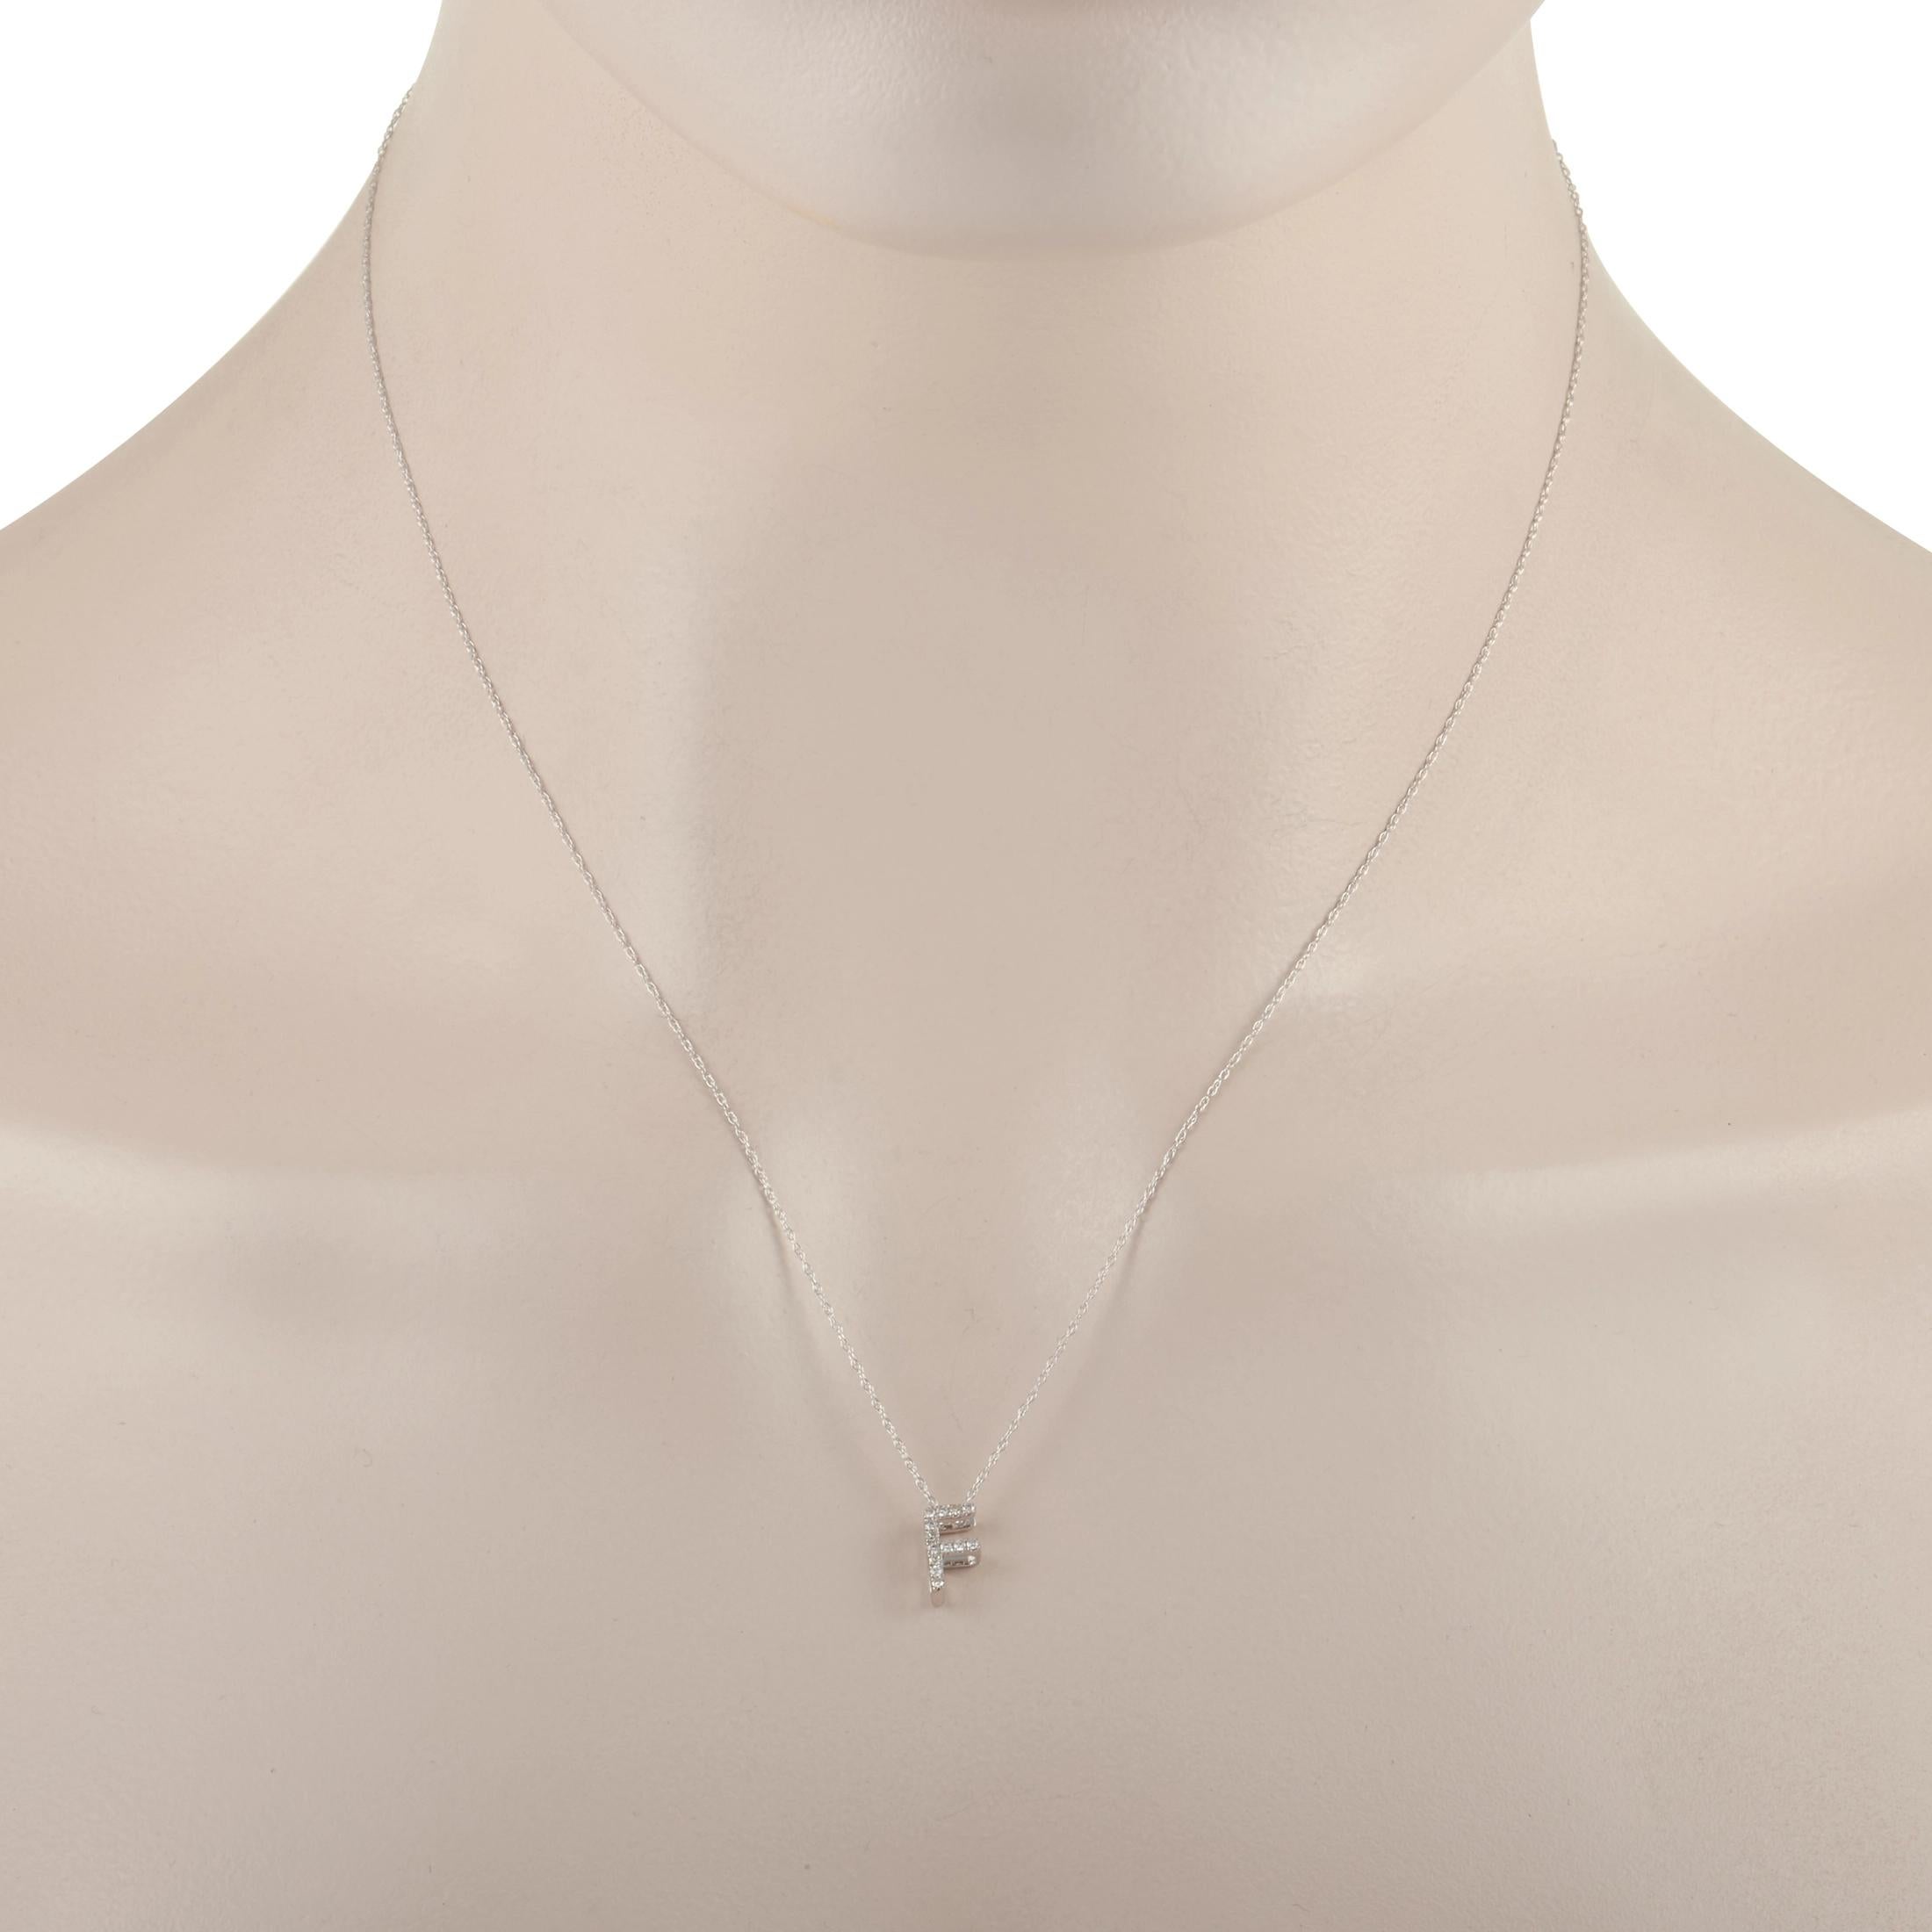 This elegant monogram pendant necklace is an exemplary way to put your initials - or the initials of your loved one - on display for all to see. With a setting crafted from shimmering 14K White Gold, it features a 0.38” letter F pendant covered in